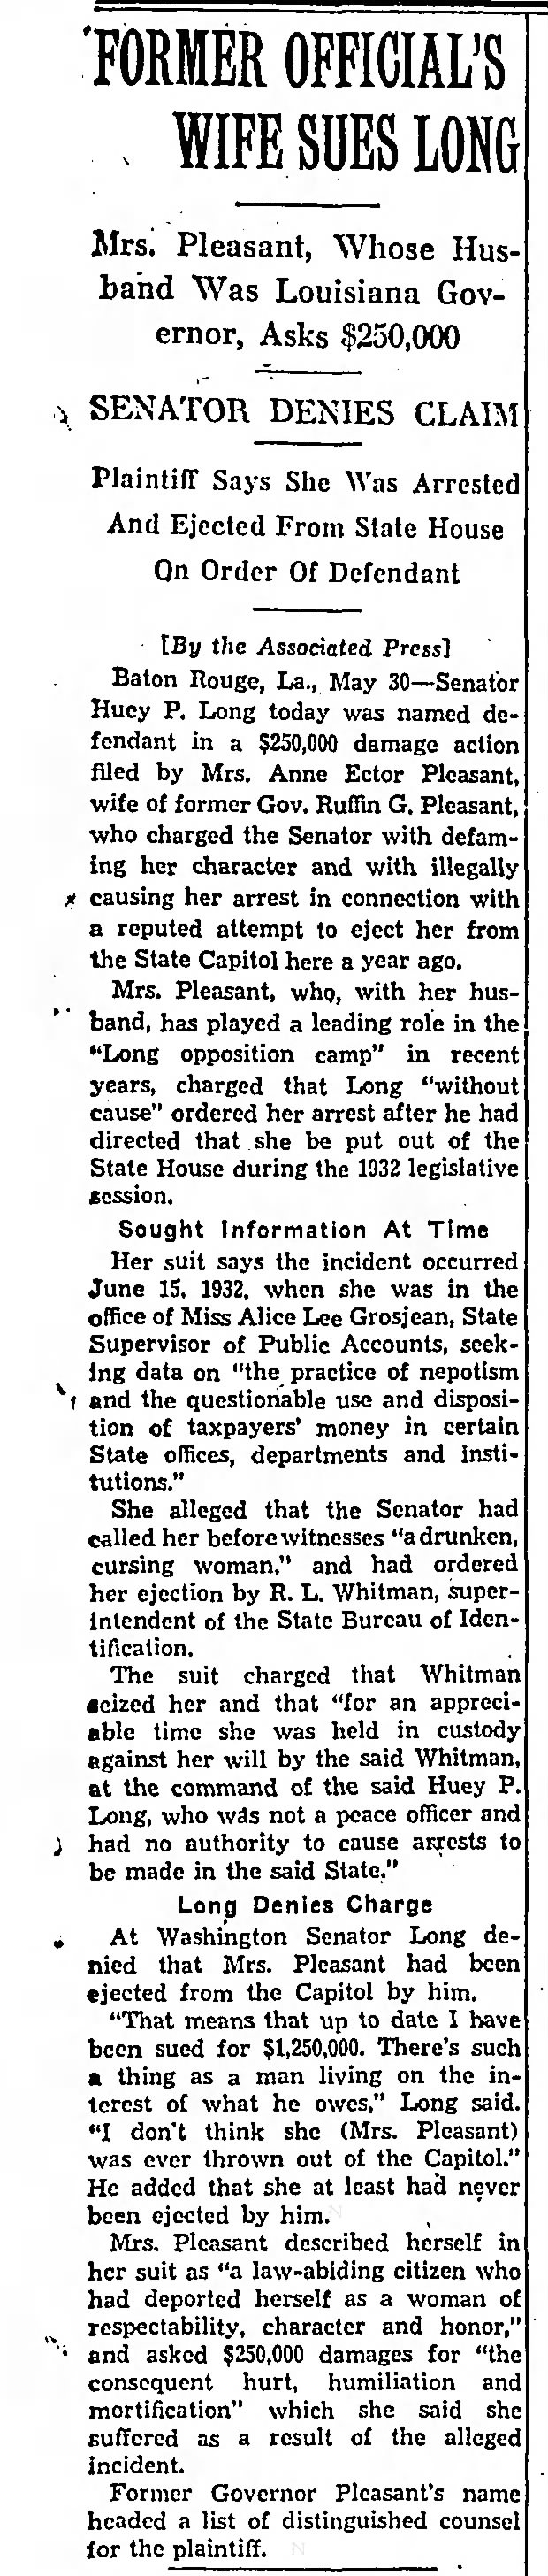 Former Official's Wife Sues Long. (AP) The Baltimore Sun (Baltimore, Maryland) May 31, 1933, p 5